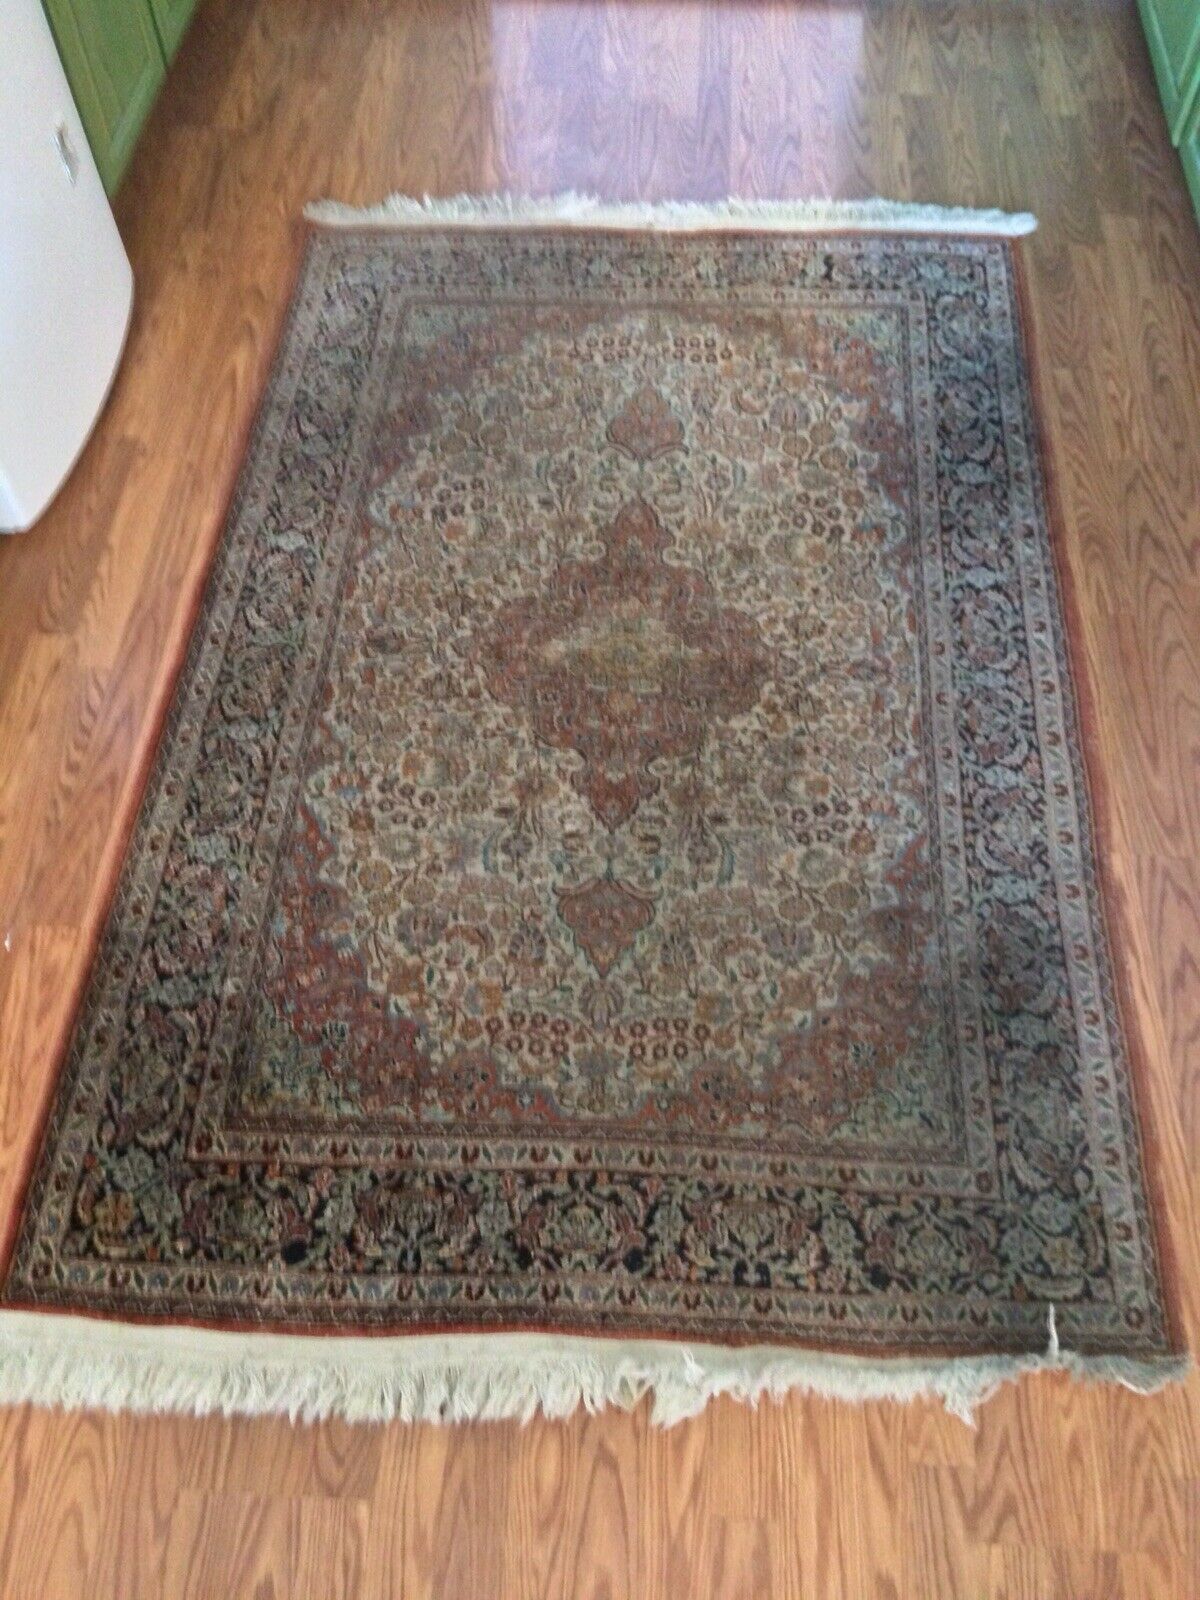 Silk Rug 6 X 4 Ft. Special Rare exquisite Vintage Handmade One Of A Kind